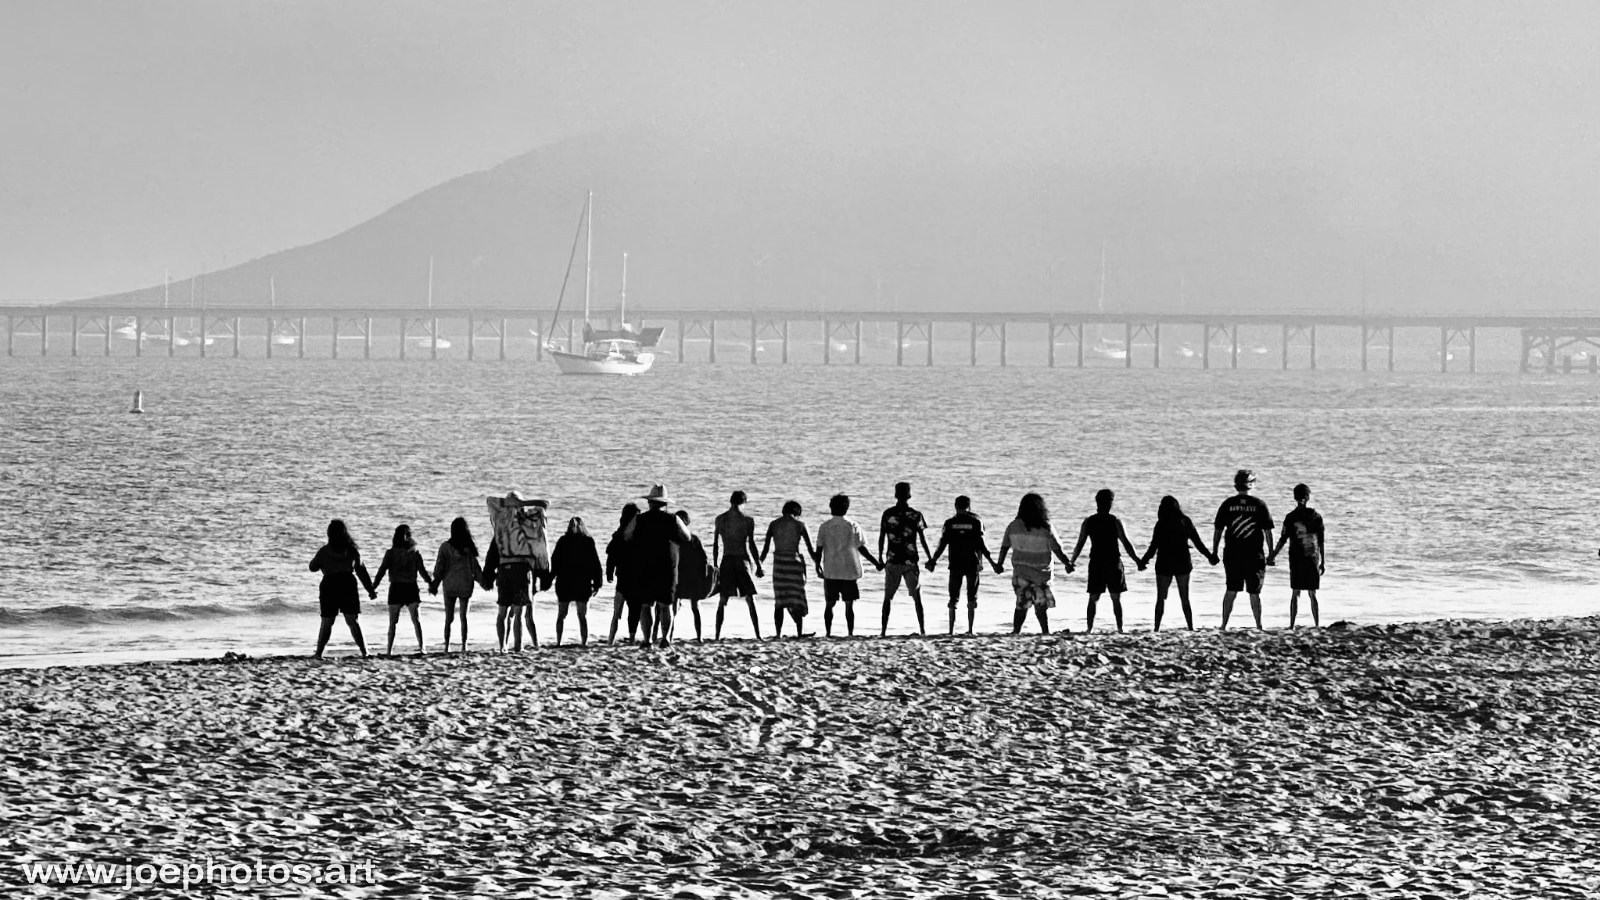 Monochrome beach people togehter.